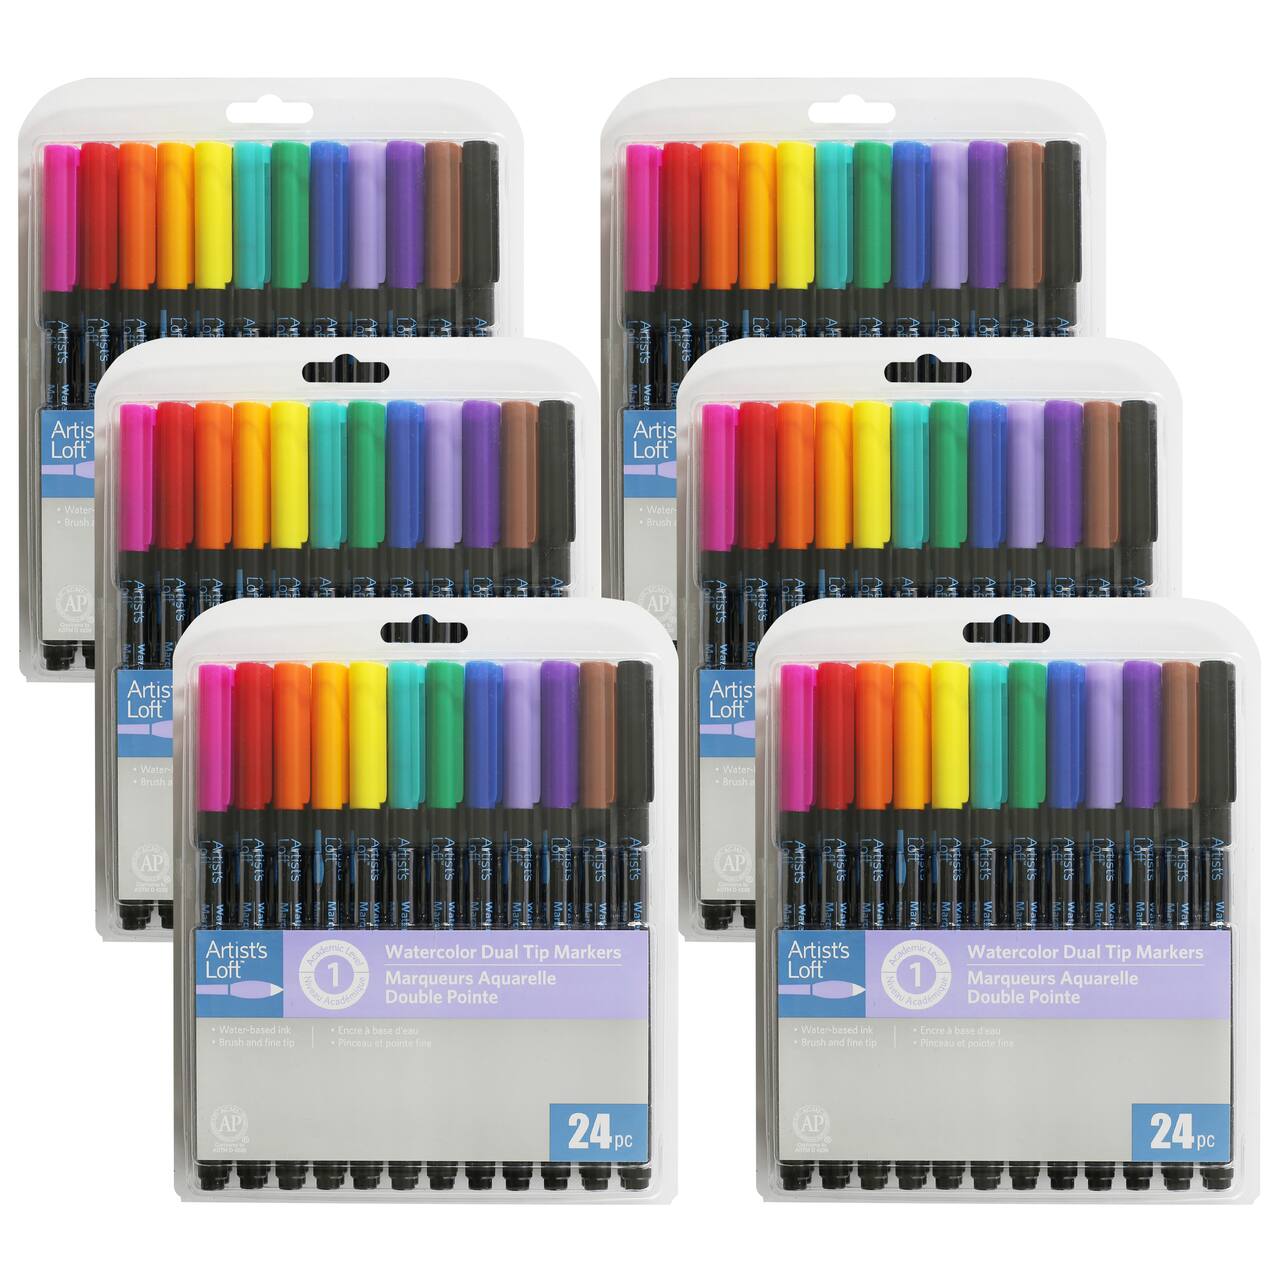 6 Packs: 24 ct. (144 total) Watercolor Dual-Tip Markers by Artist's Loft™